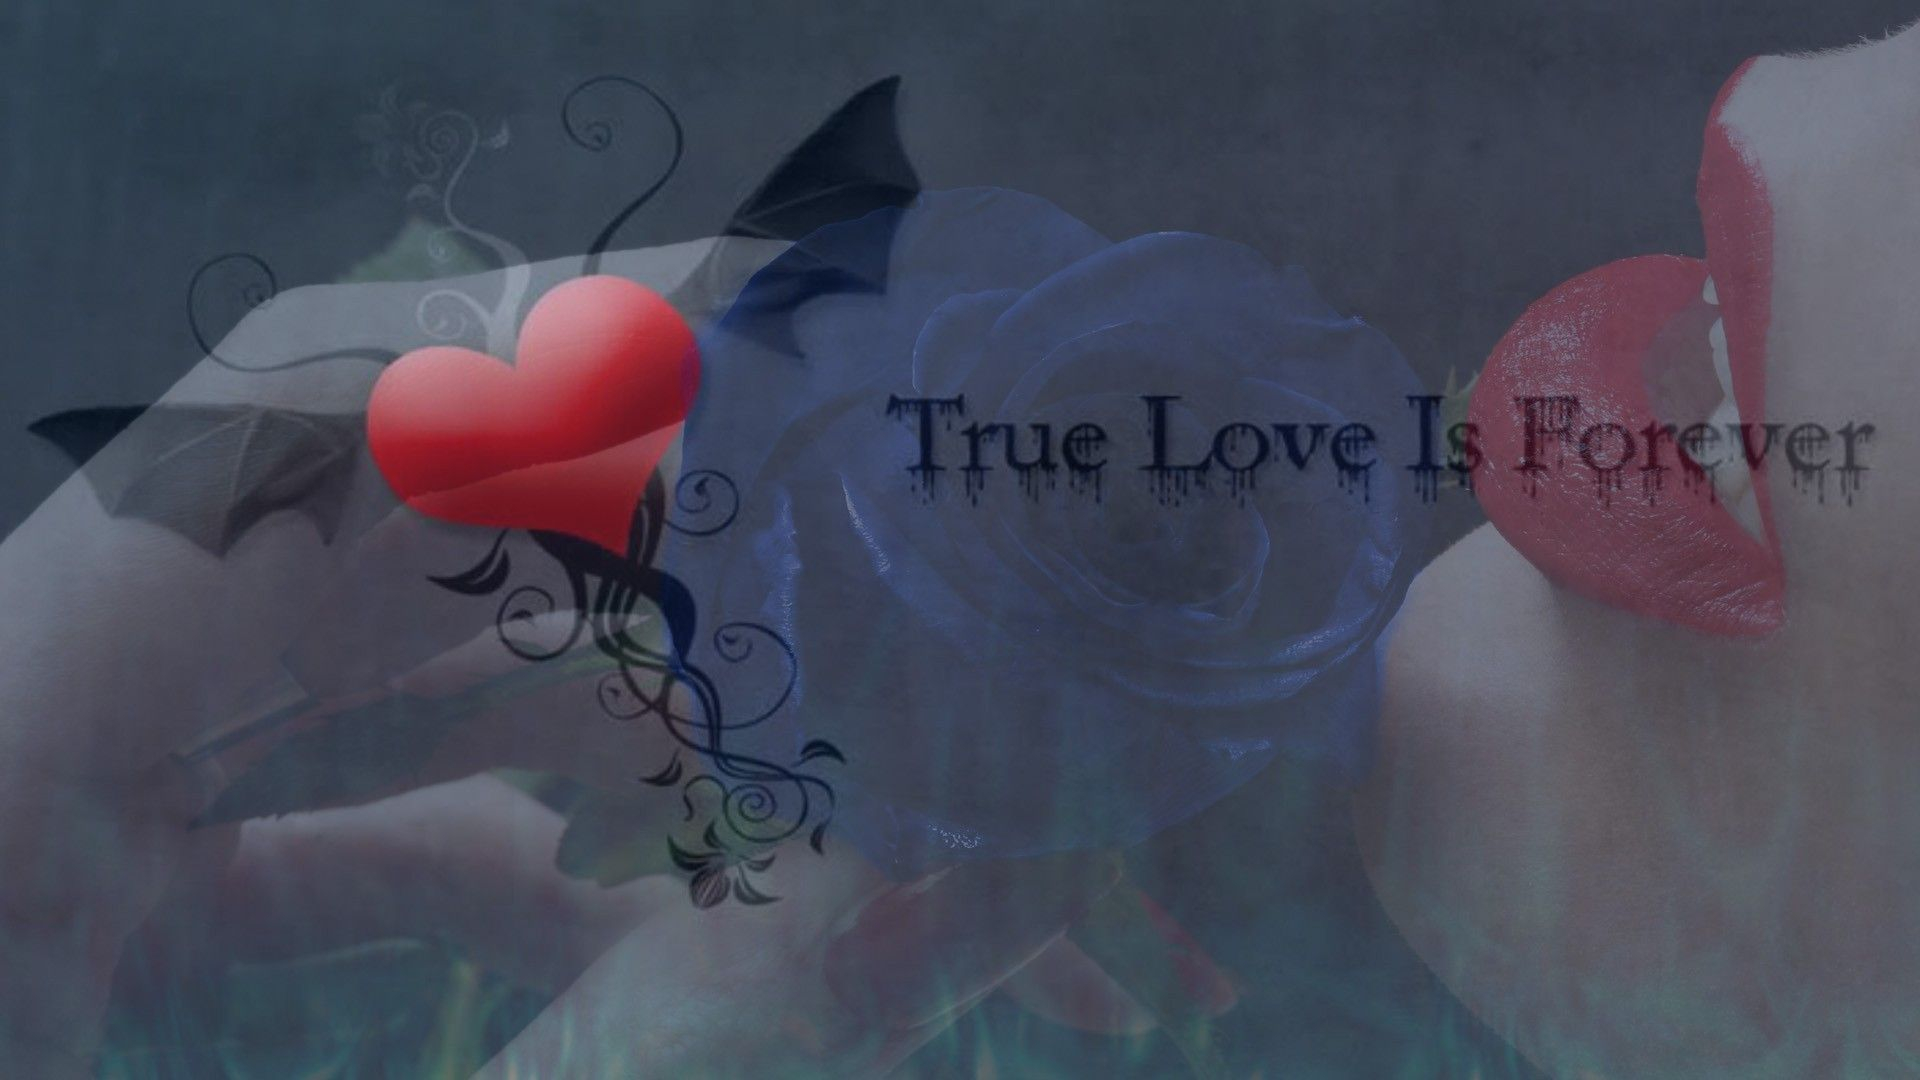 1920x1080 True love is forever wallpaper | True love images, True love, Love images